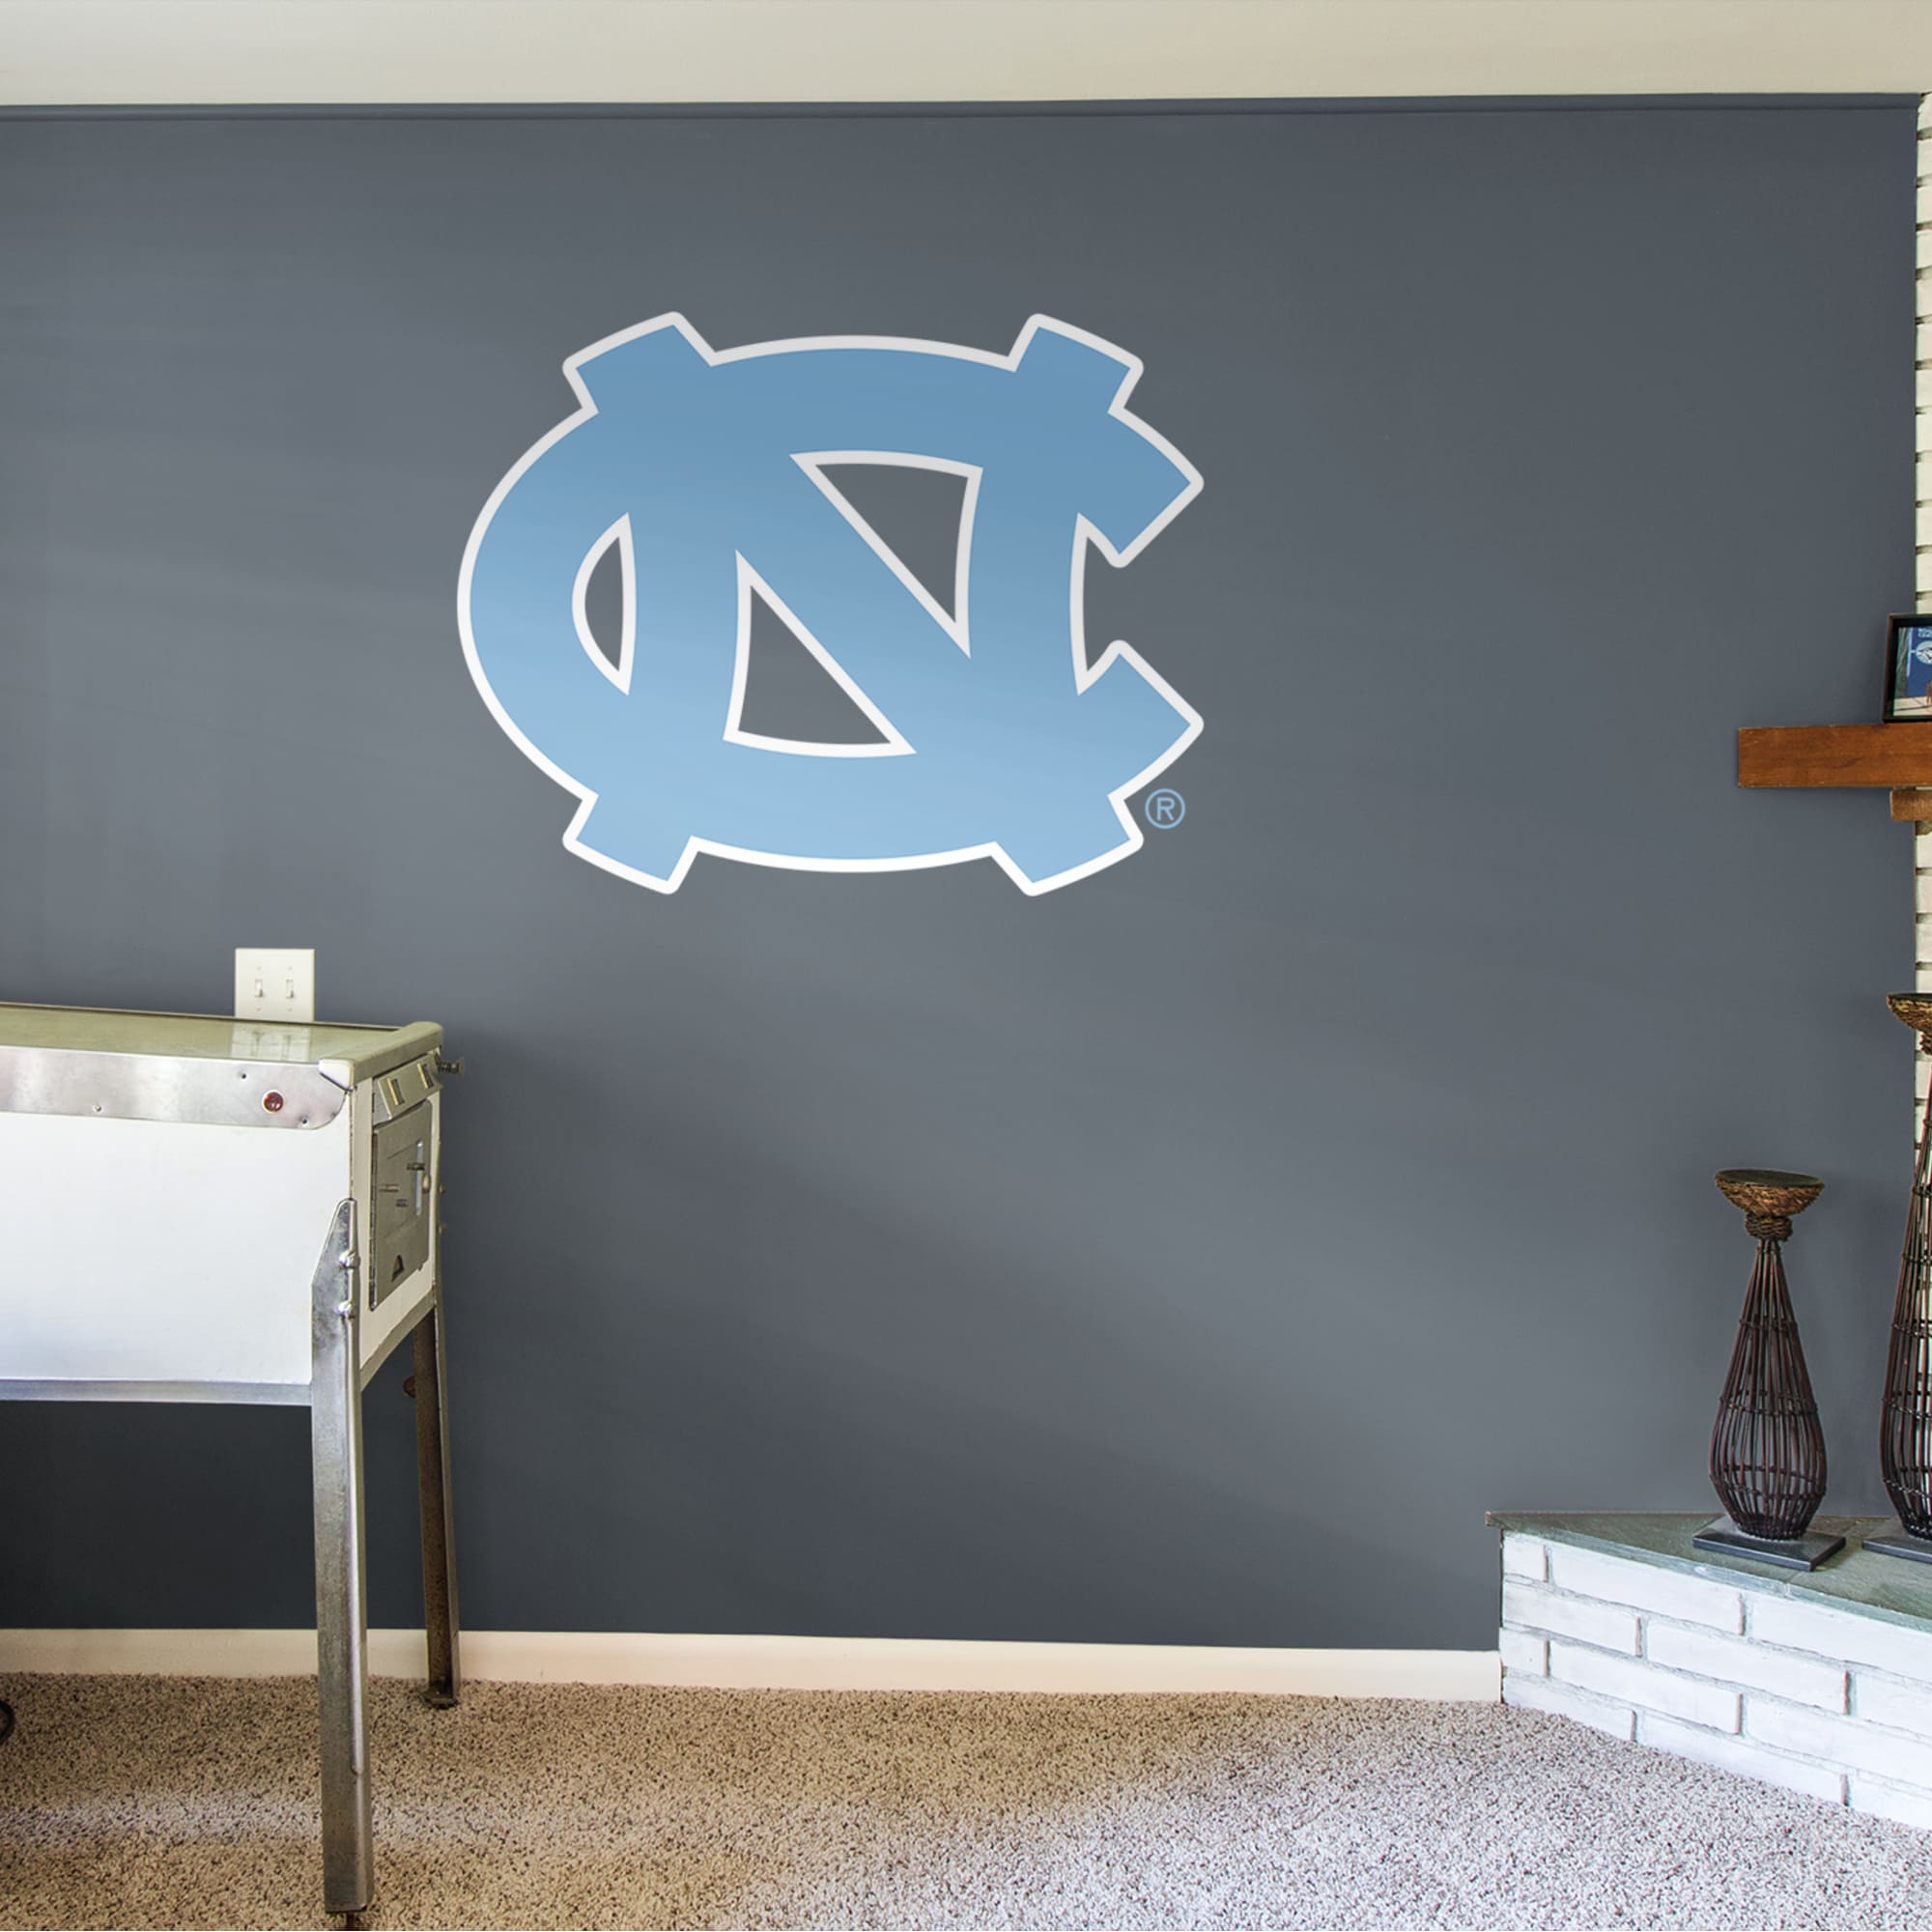 North Carolina Tar Heels: Logo - Officially Licensed Removable Wall Decal 47.0"W x 37.0"H by Fathead | Vinyl